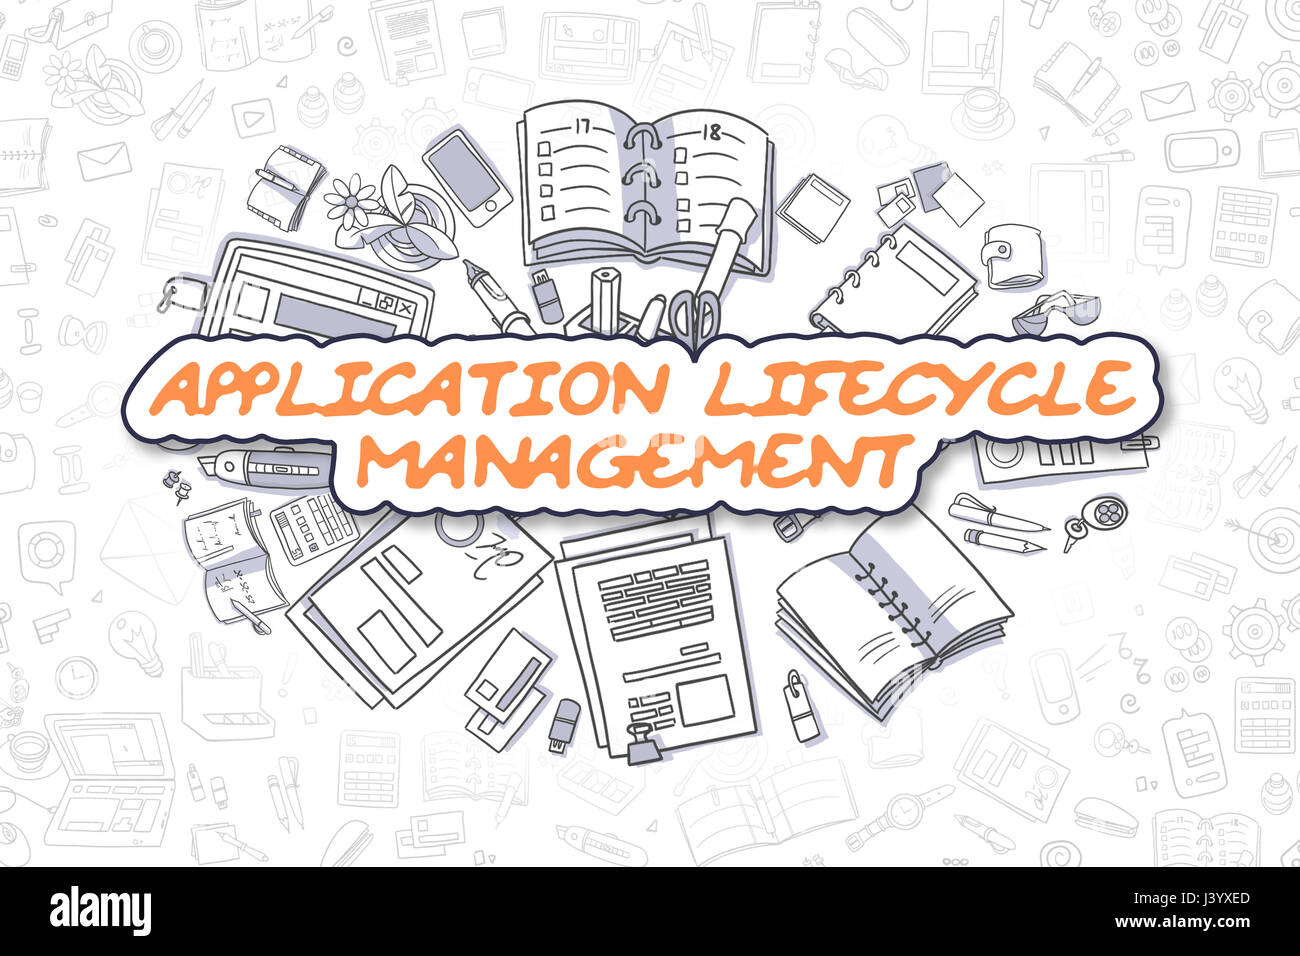 Application Lifecycle Management - Business Concept. Stock Photo